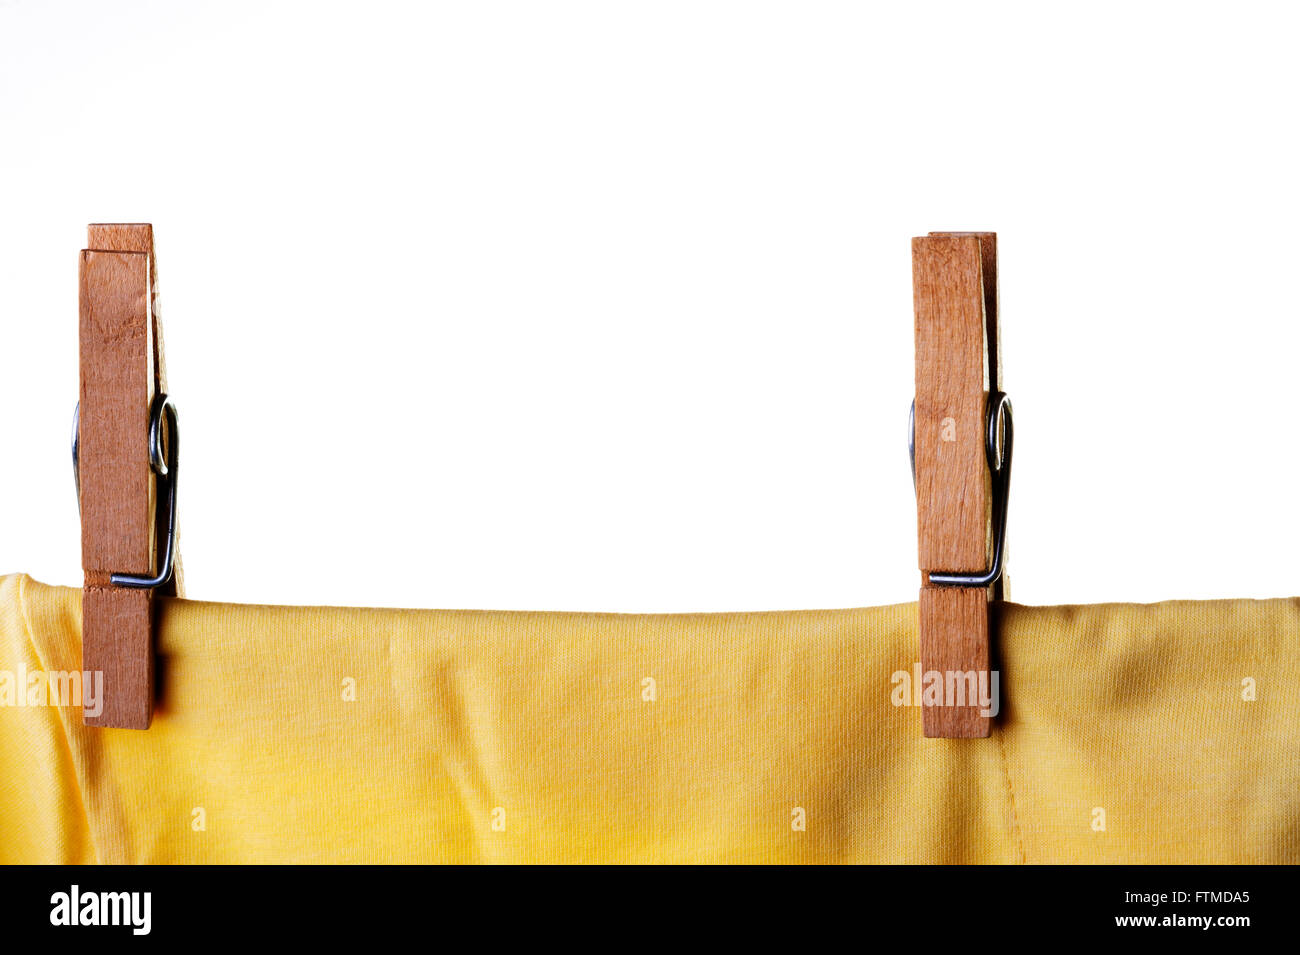 Wooden clothes peg or pin securing a yellow t-shirt on clothes line. Stock Photo